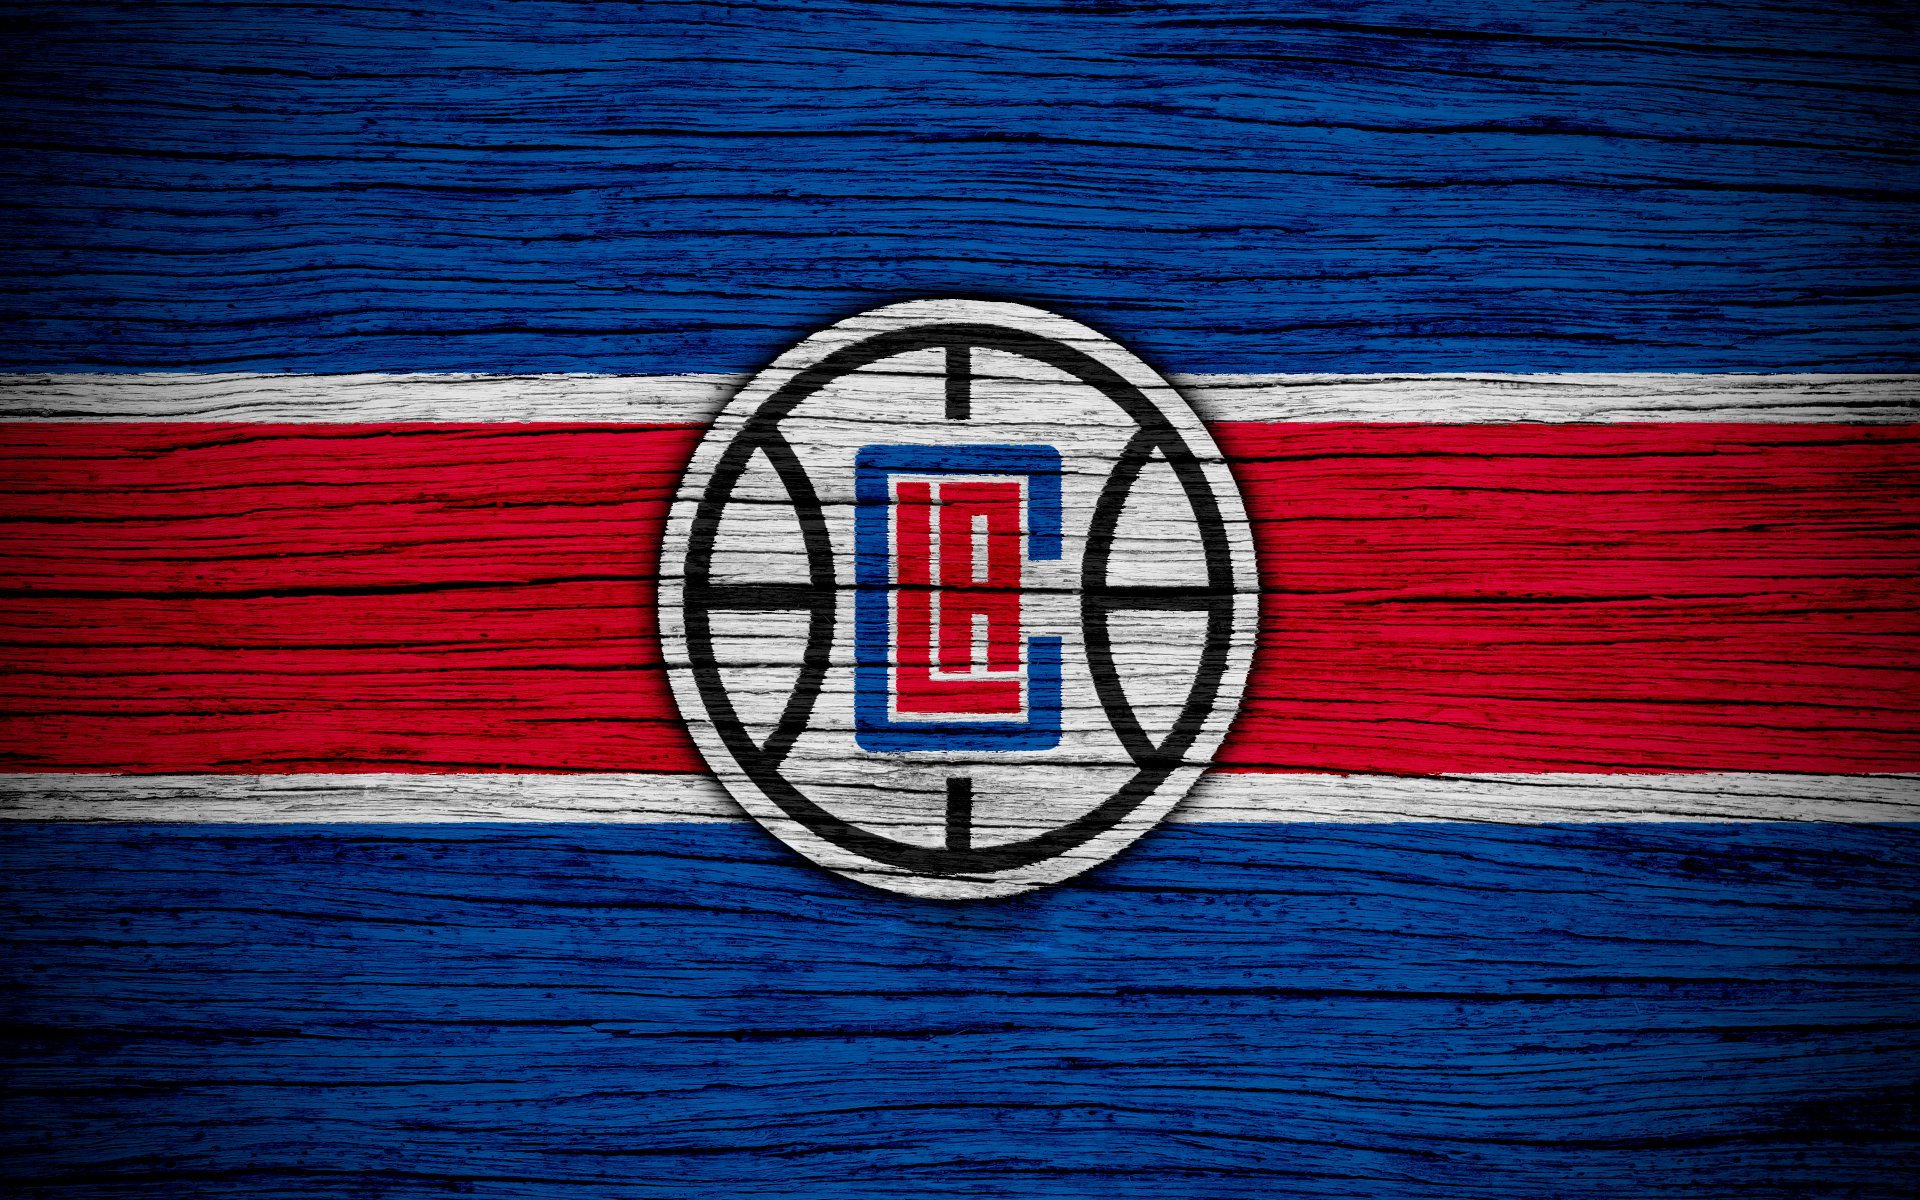 LA Clippers  Blessing your TL this Wallpaper Wednesday  Facebook